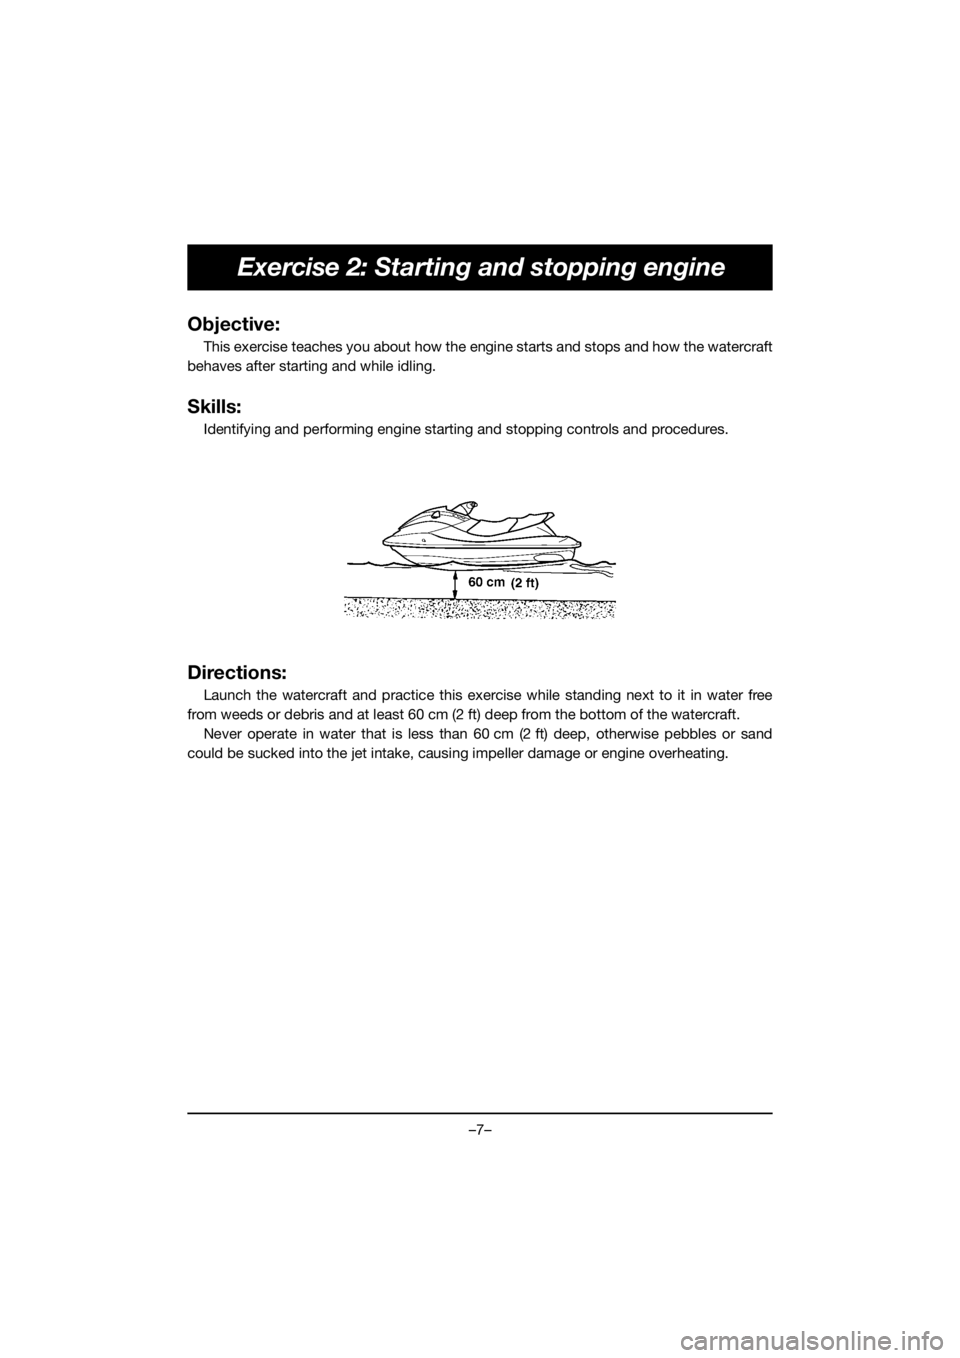 YAMAHA EX 2019  Bruksanvisningar (in Swedish) –7–
Exercise 2: Starting and stopping engine
Objective:
This exercise teaches you about how the engine starts and stops and how the watercraft
behaves after starting and while idling.
Skills:
Iden